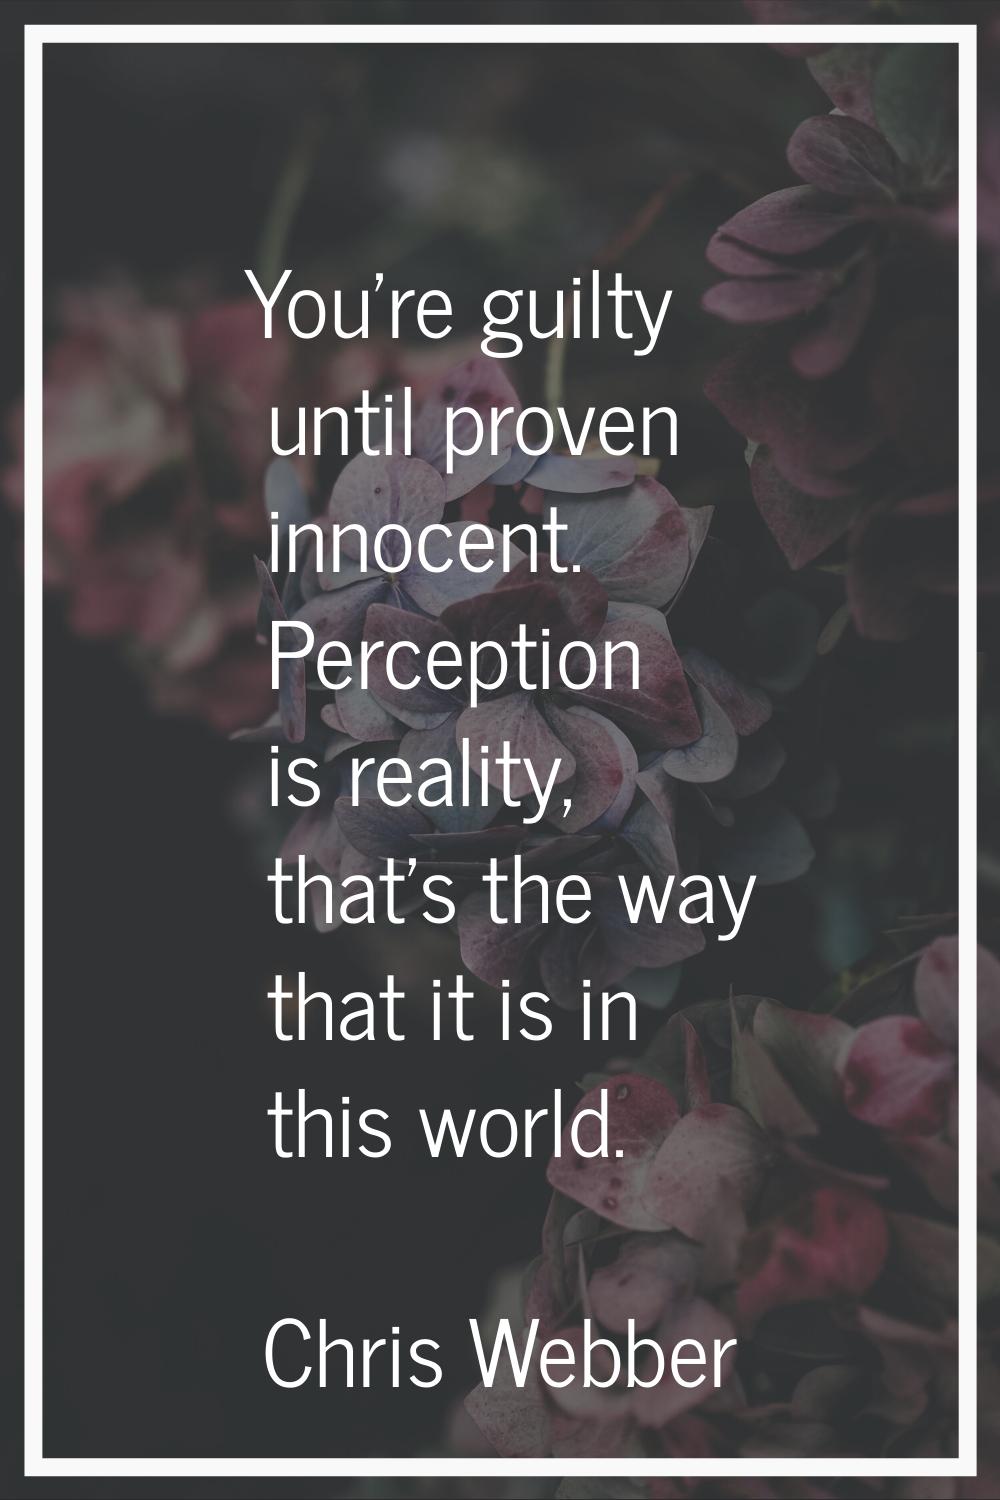 You're guilty until proven innocent. Perception is reality, that's the way that it is in this world